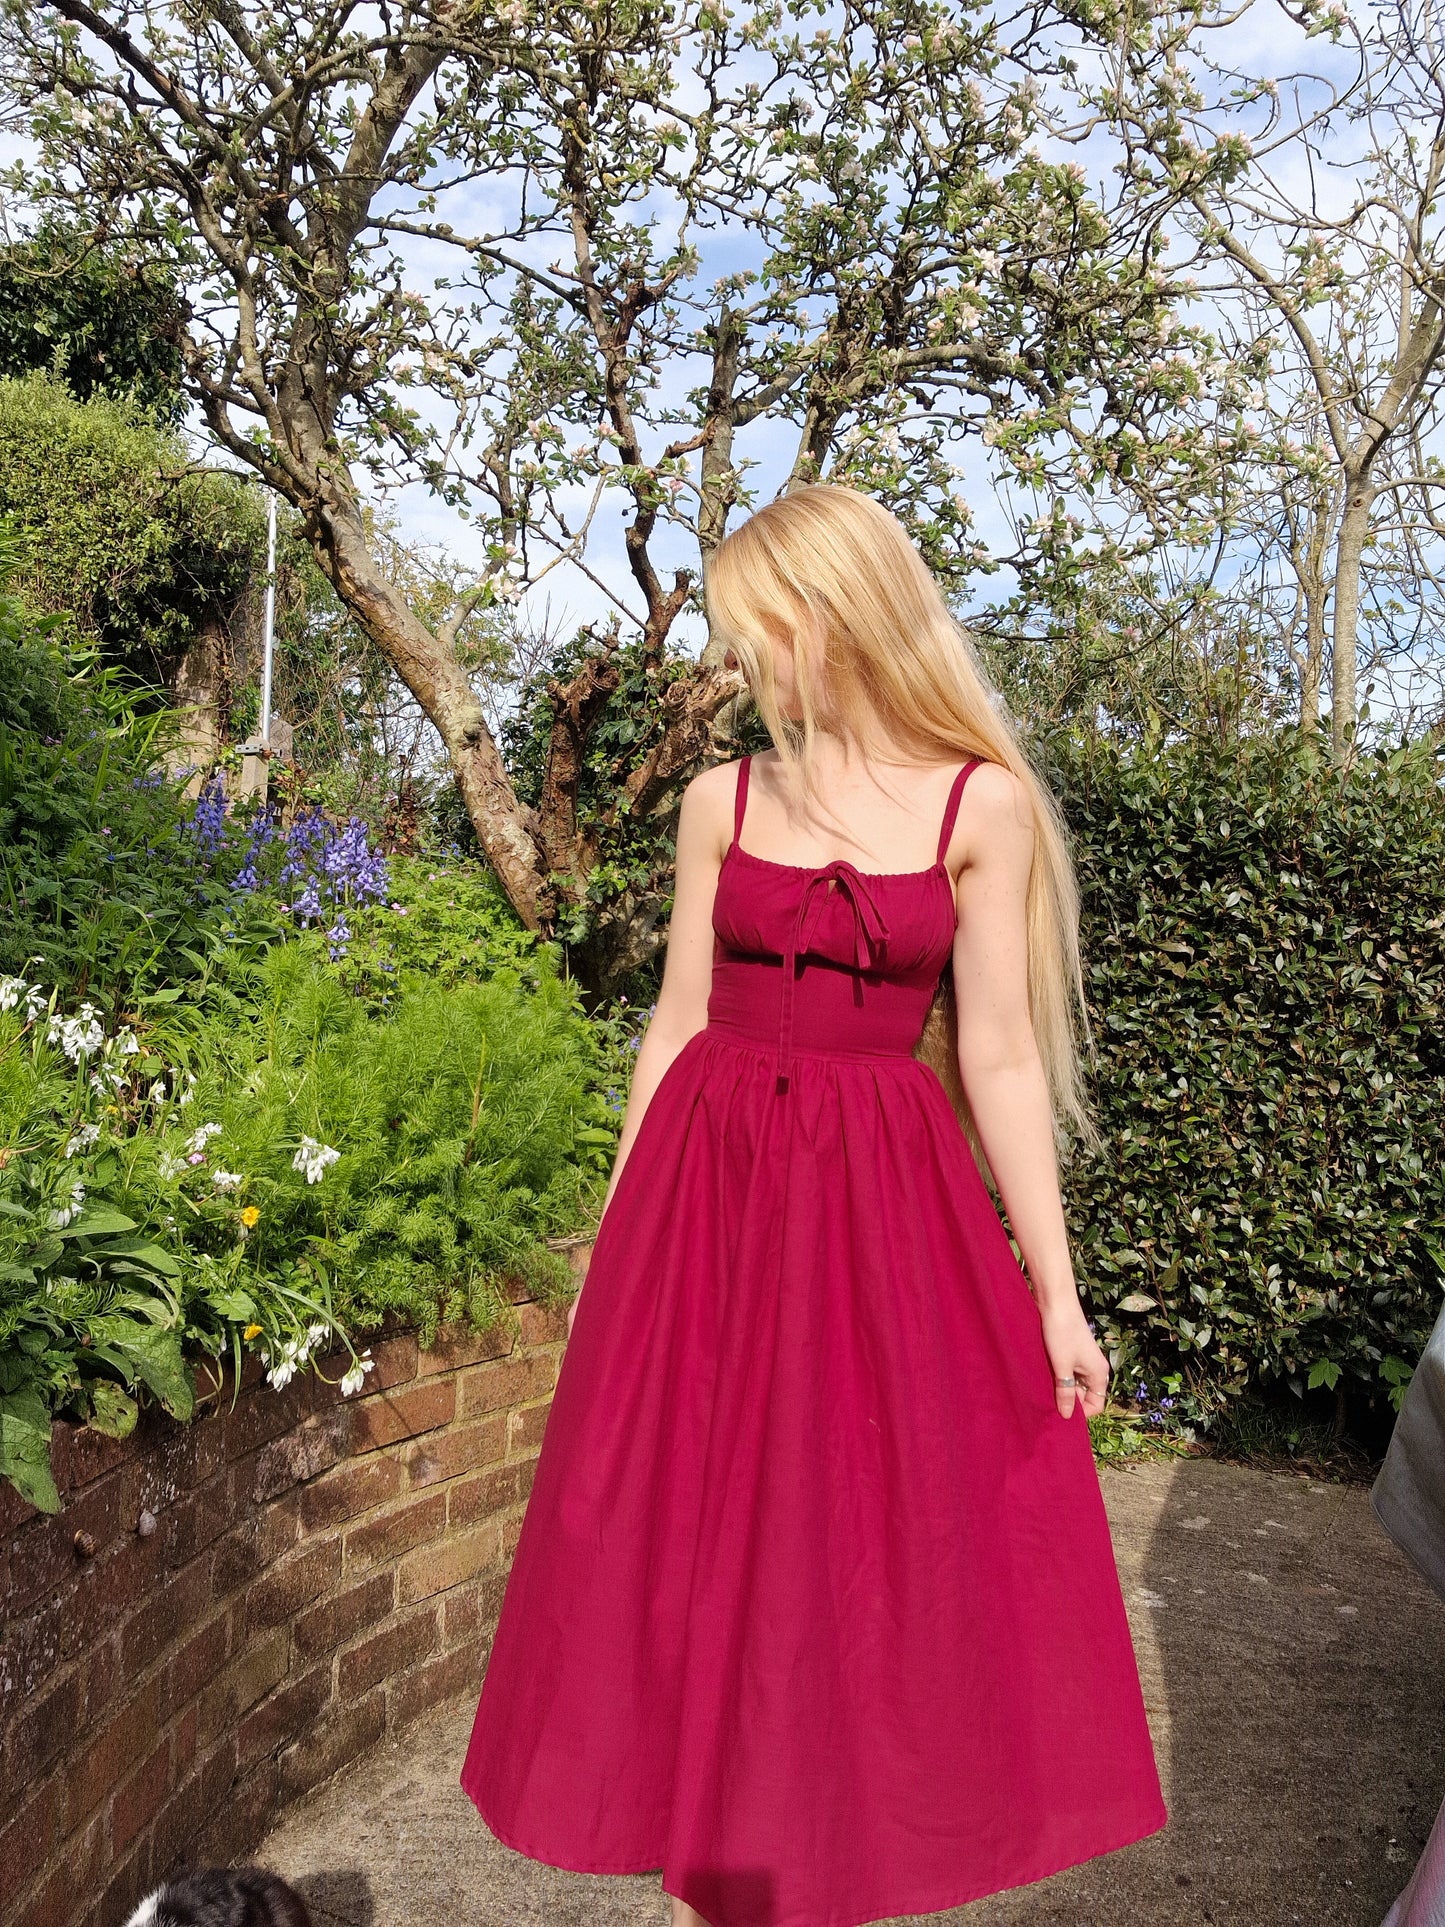 Strappy Milkmaid Dress (Lace Up Back)